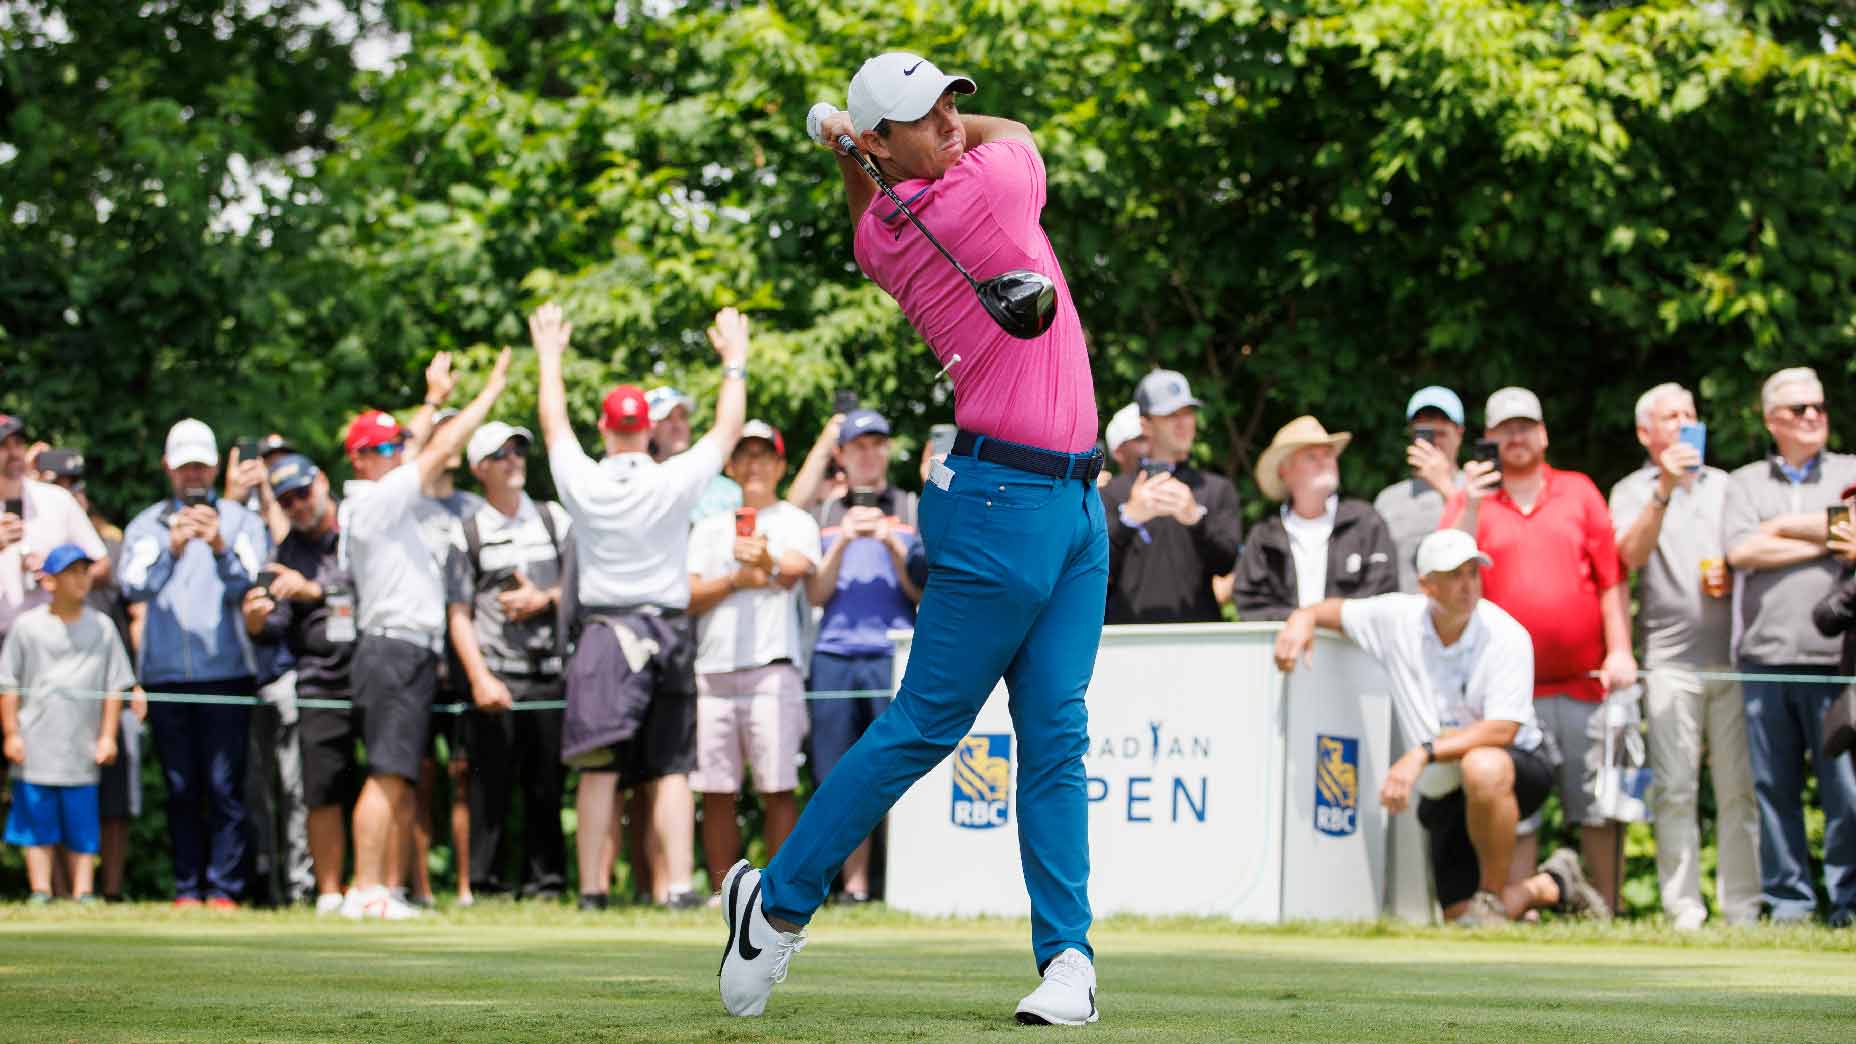 Rory McIlroy hits tee shot at RBC Canadian Open